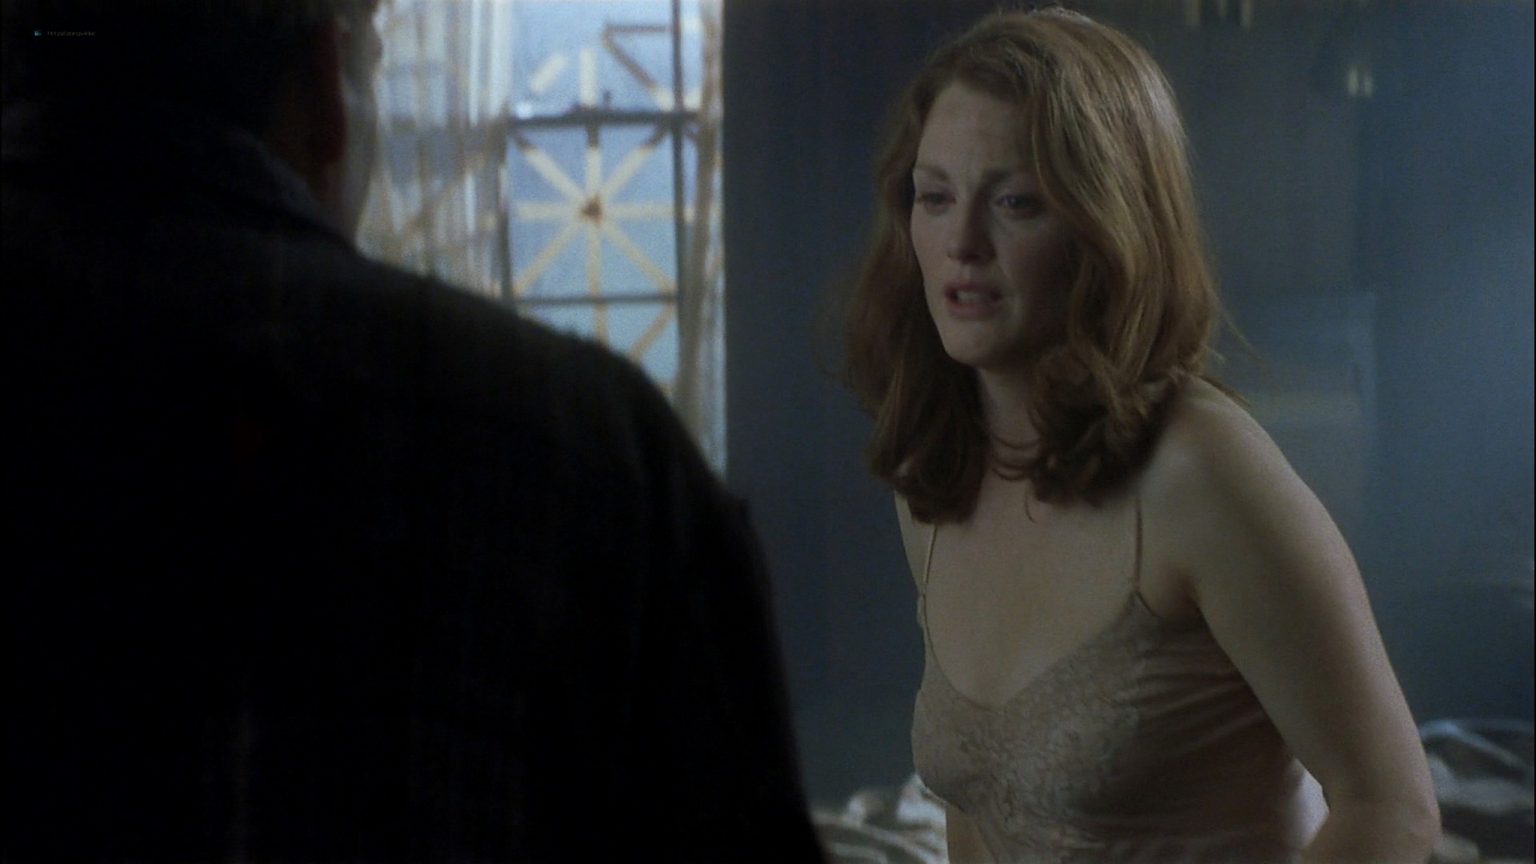 https://www.zorg.video/wp-content/uploads/2017/06/Julianne-Moore-nude-topless-and-sex-The-End-of-the-Affair-1999-HD-1080p-WEB-013-1536x864.jpg